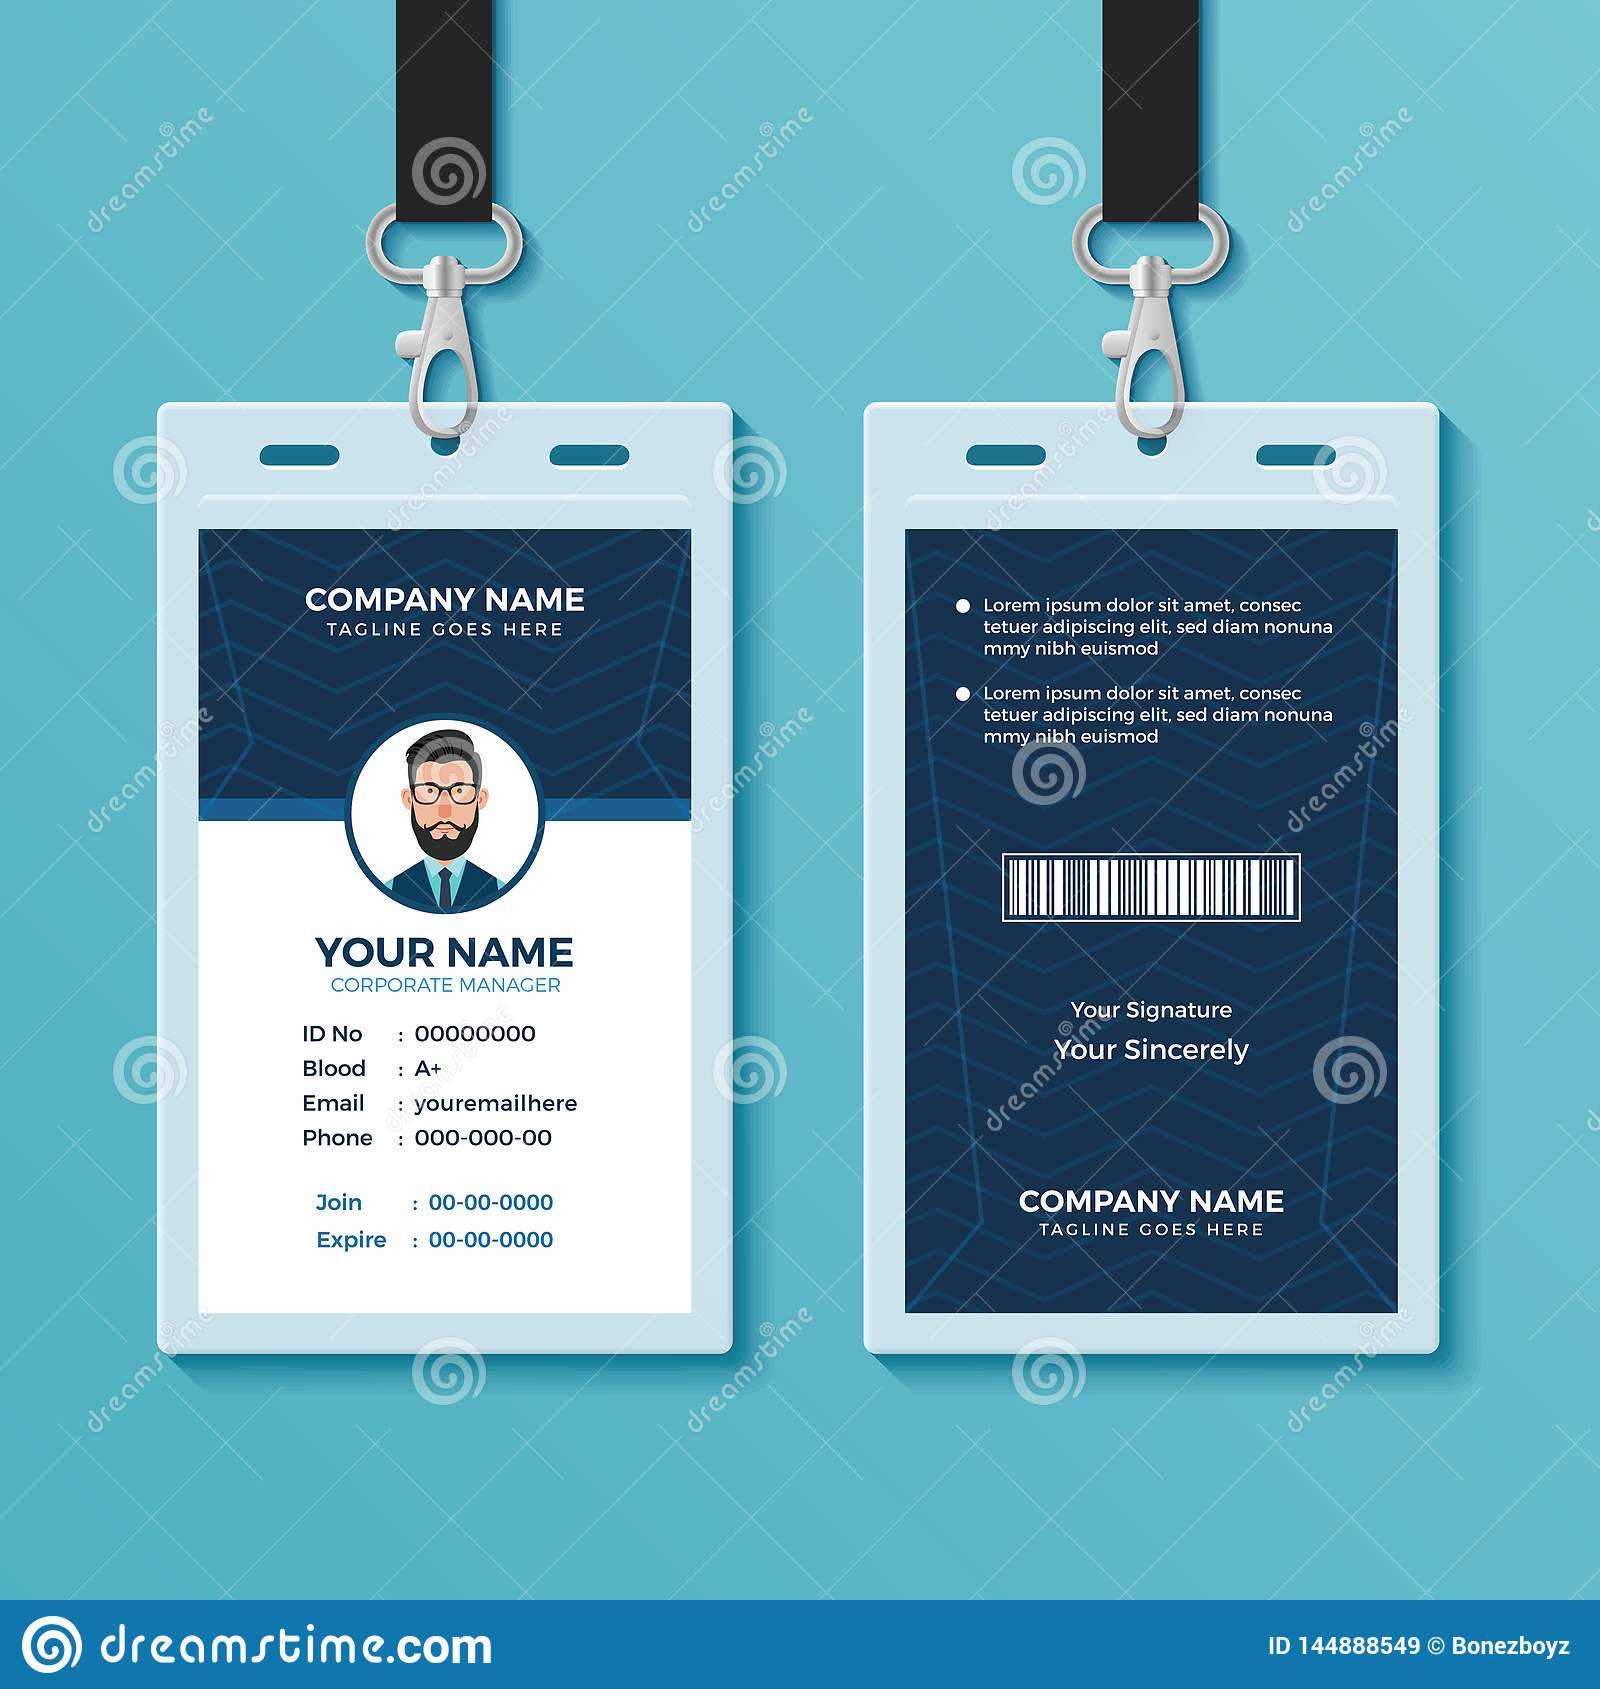 Modern And Clean Id Card Design Template Stock Vector Regarding Company Id Card Design Template